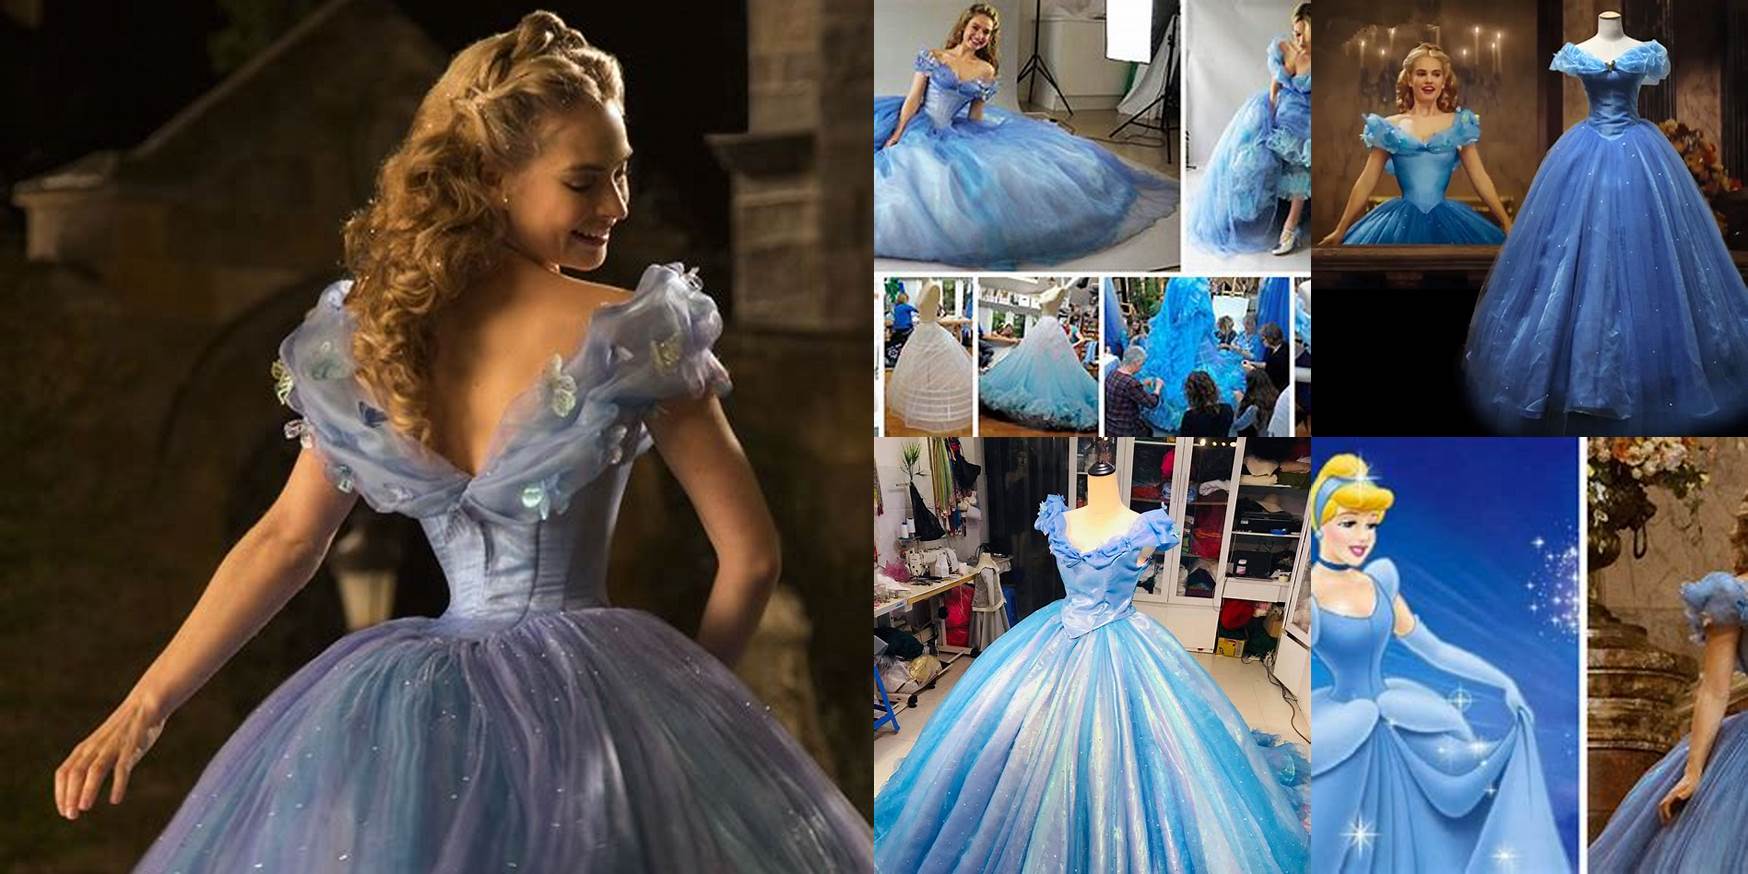 How Much Did The Cinderella Dress Weigh